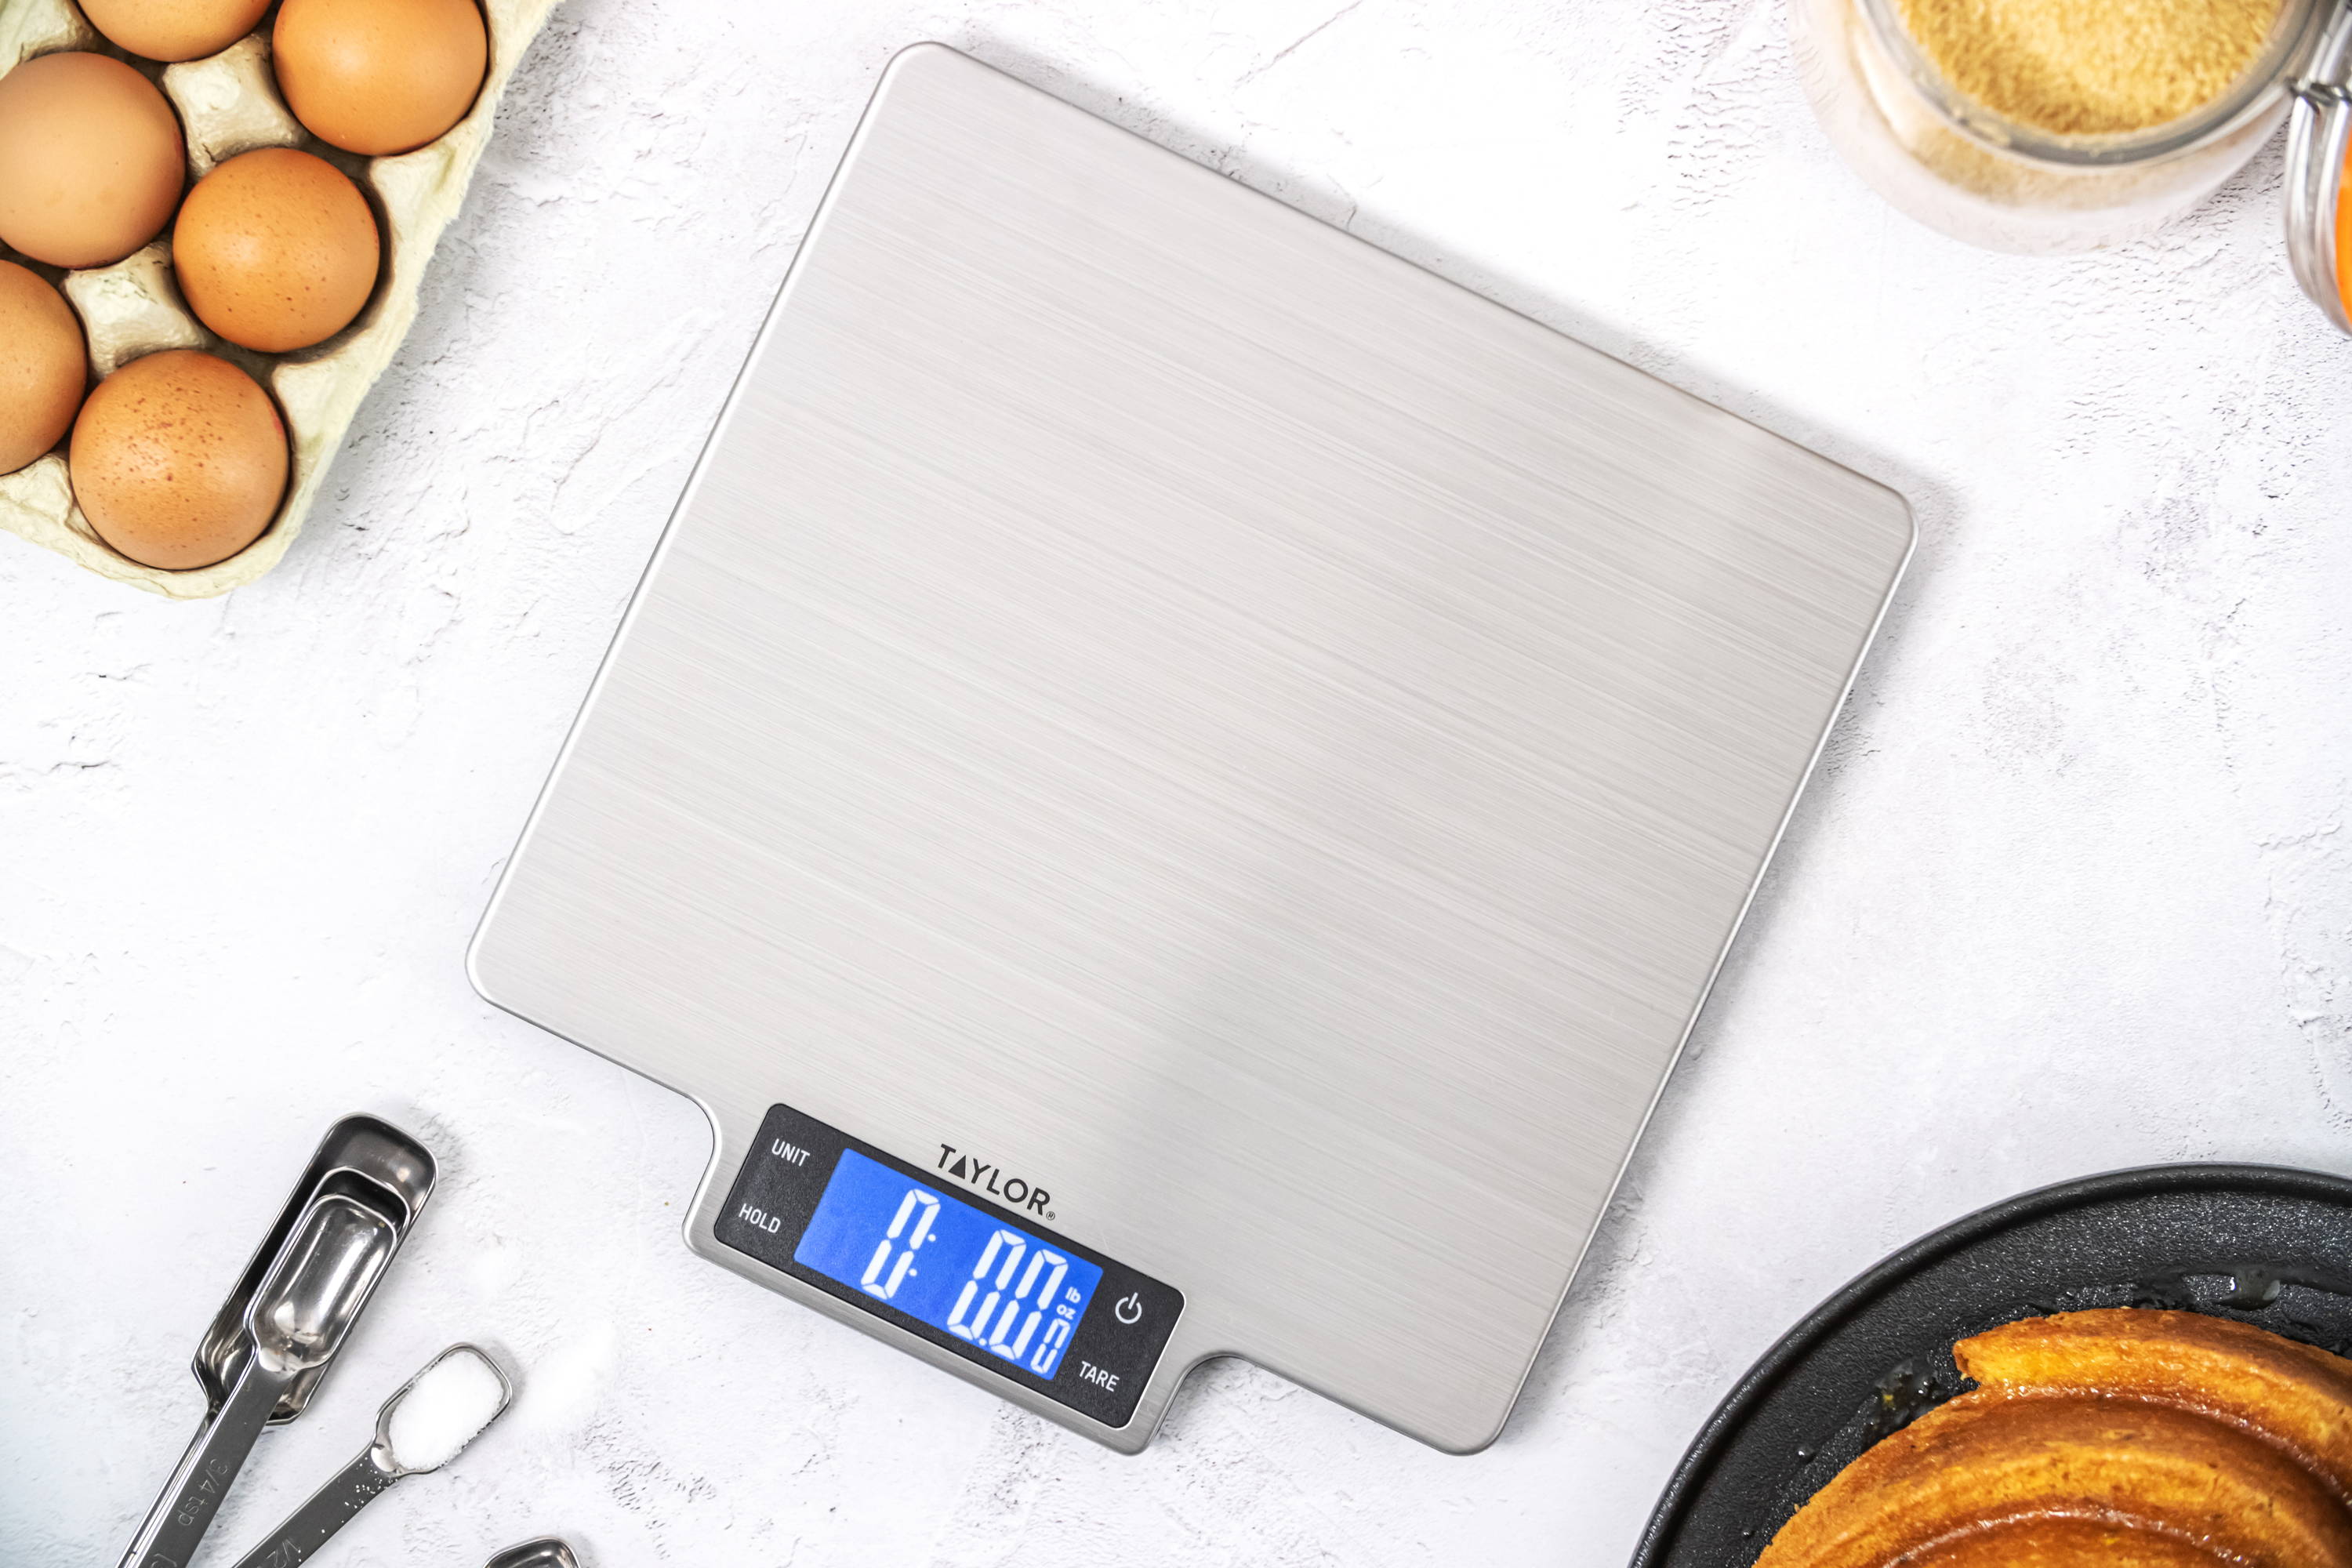 Electronic Kitchen Scale With Bowl, Digital Food Scale, Easy To Read  Display, Metric & Imperial, Liquid Measures, Max. 5kg, Black